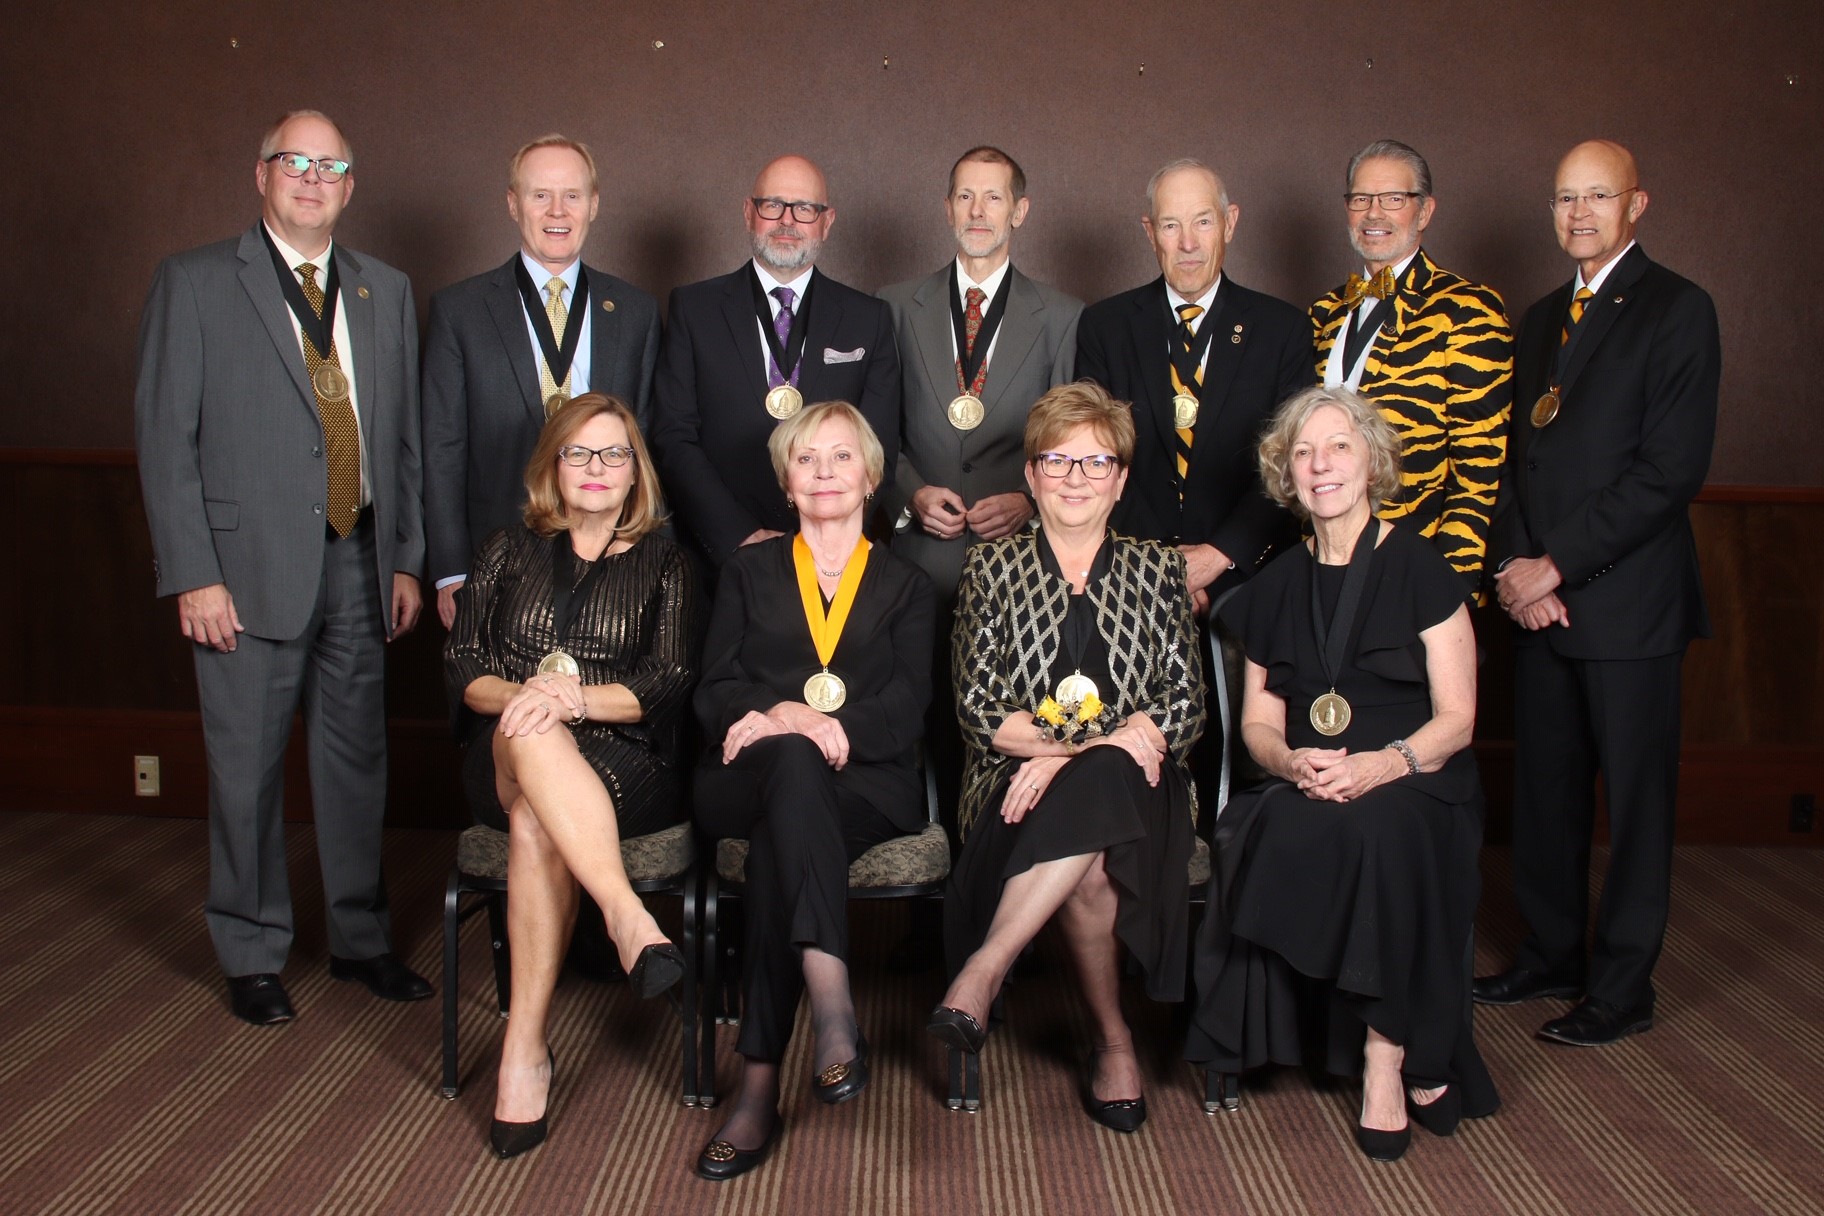 The Mizzou Alumni Association honored 12 distinguished faculty and alumni on Nov. 15. Honorees include (top row from left to right) J.D. Bowers, William Corrigan Jr., Scott Woelfel, Peter Vallentyne, Robert Banning, John Qualy and Michael Middleton. (front row left to right) Angela Drake, Margaret Duffy, Susan Donnell Scott and Jeanne Abbott. Thomas Lafferre not pictured. 